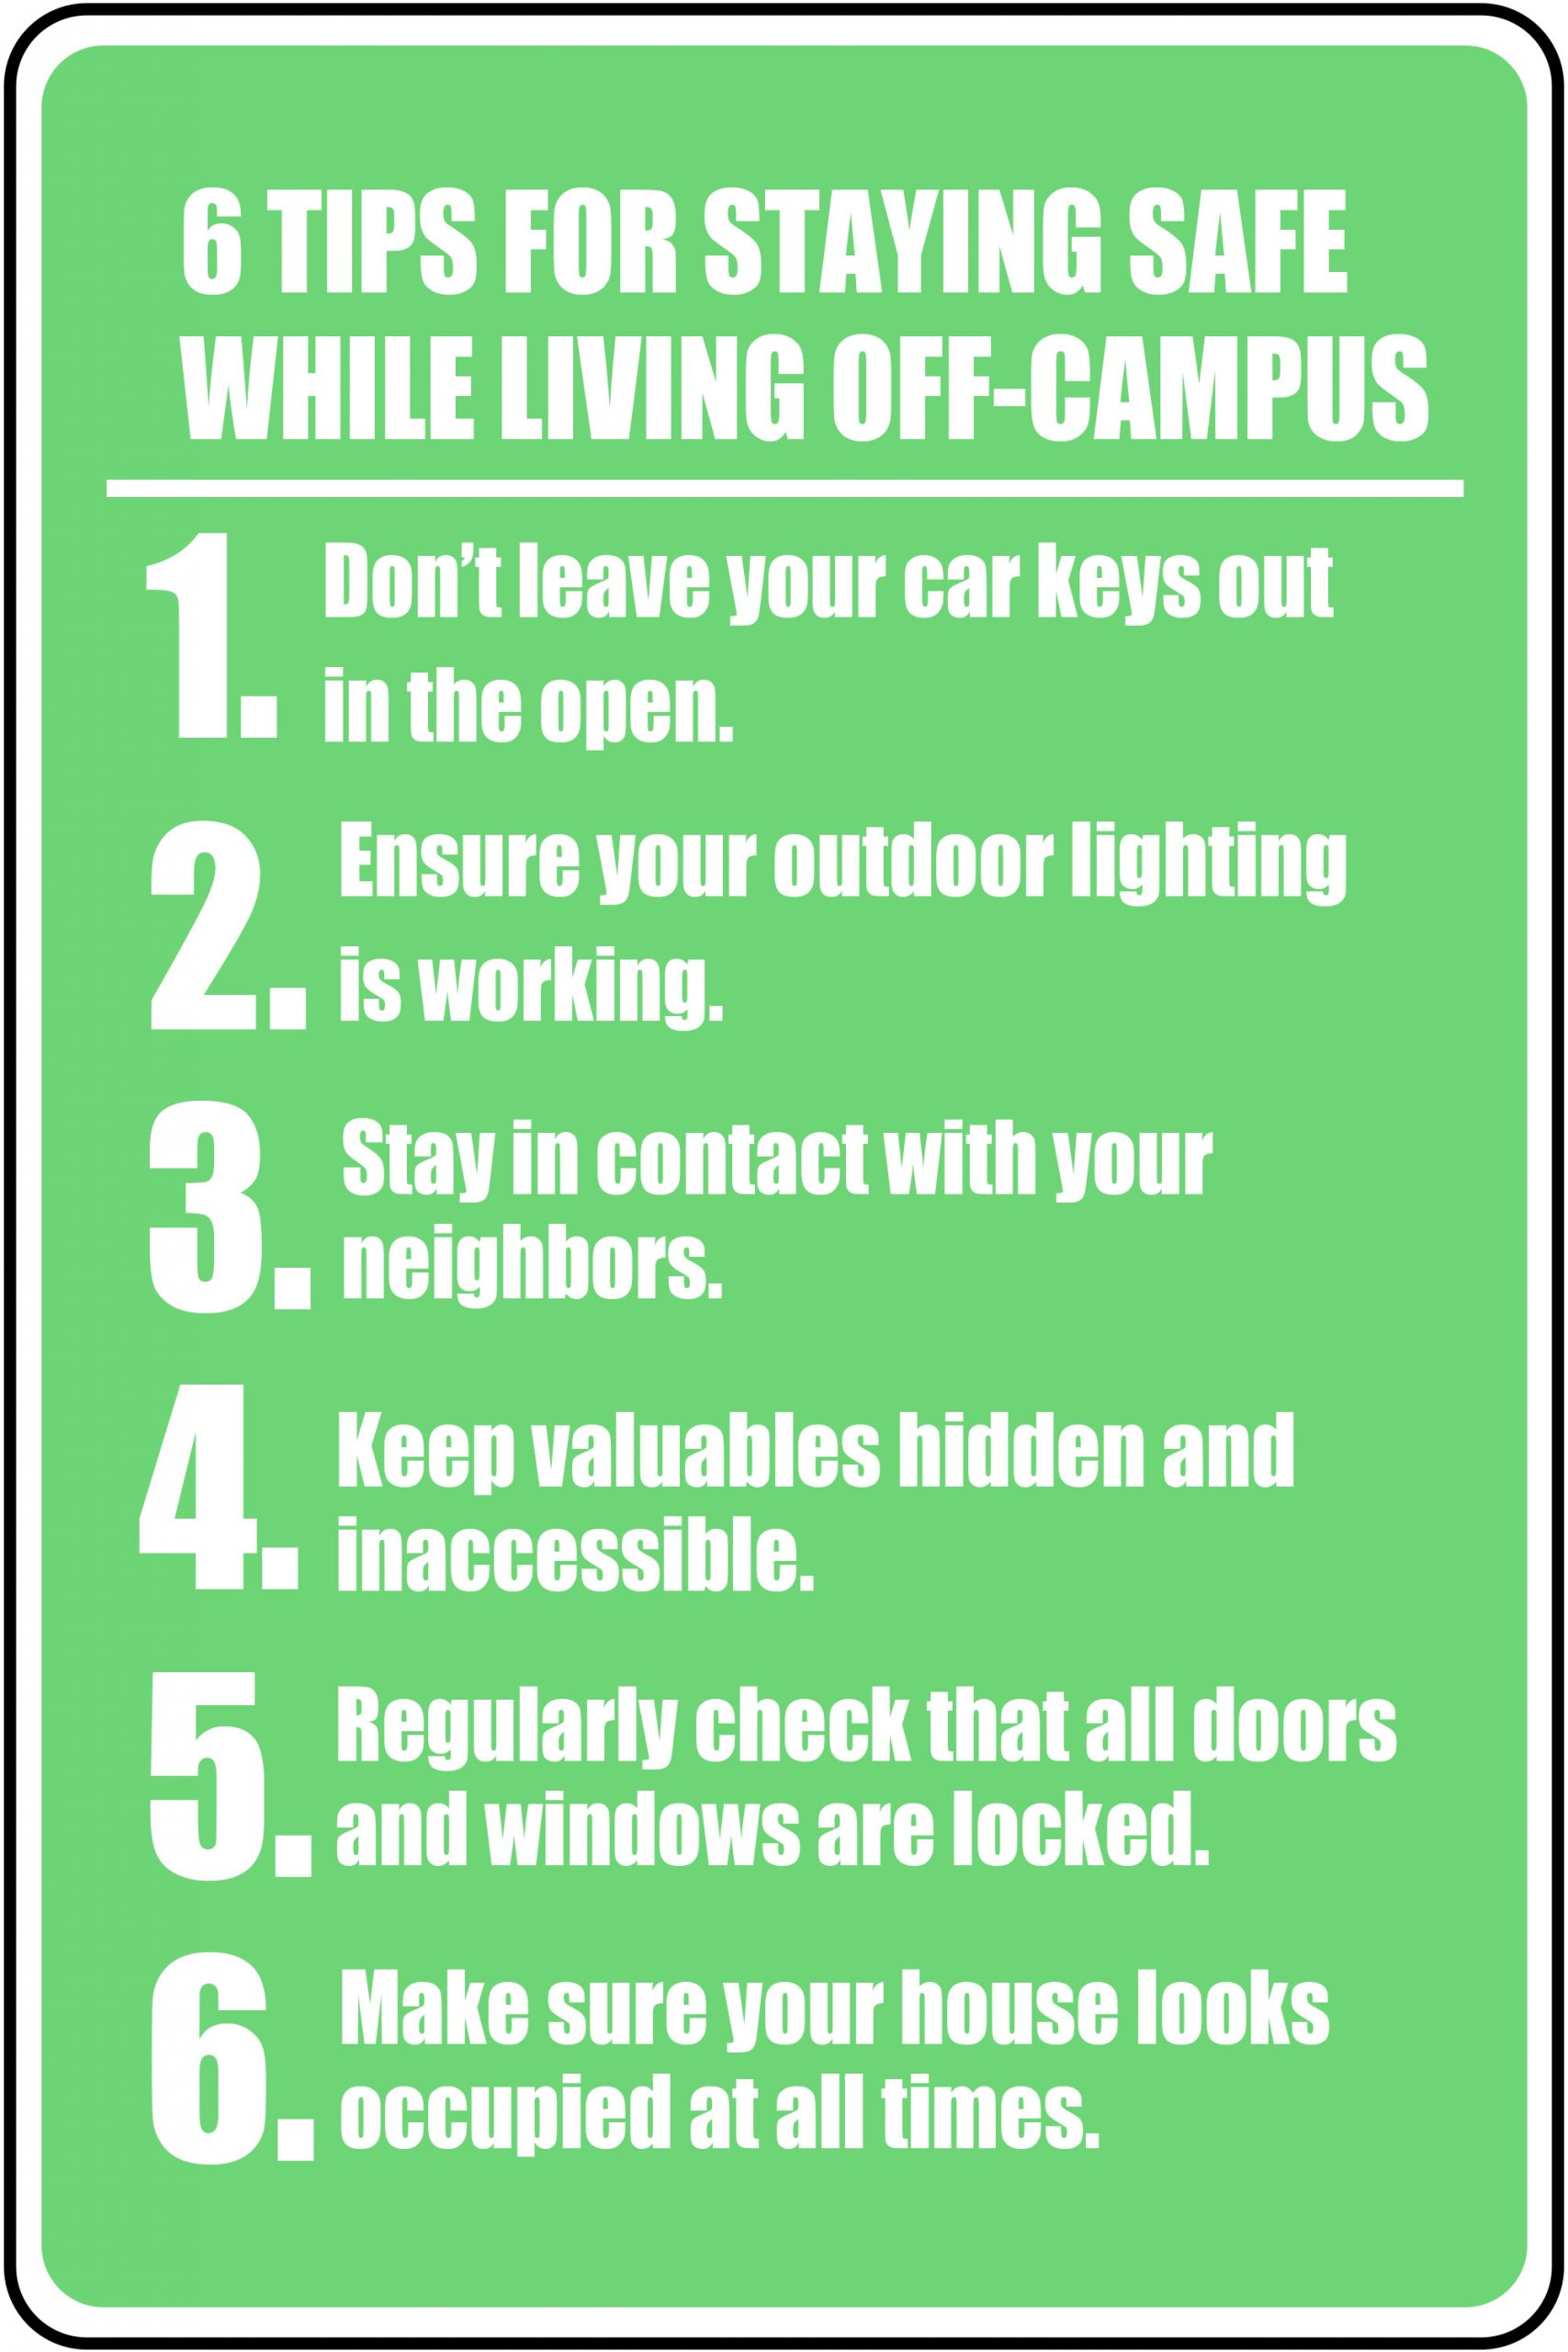 Infographic: Tips for Staying Safe While Living Off-Campus